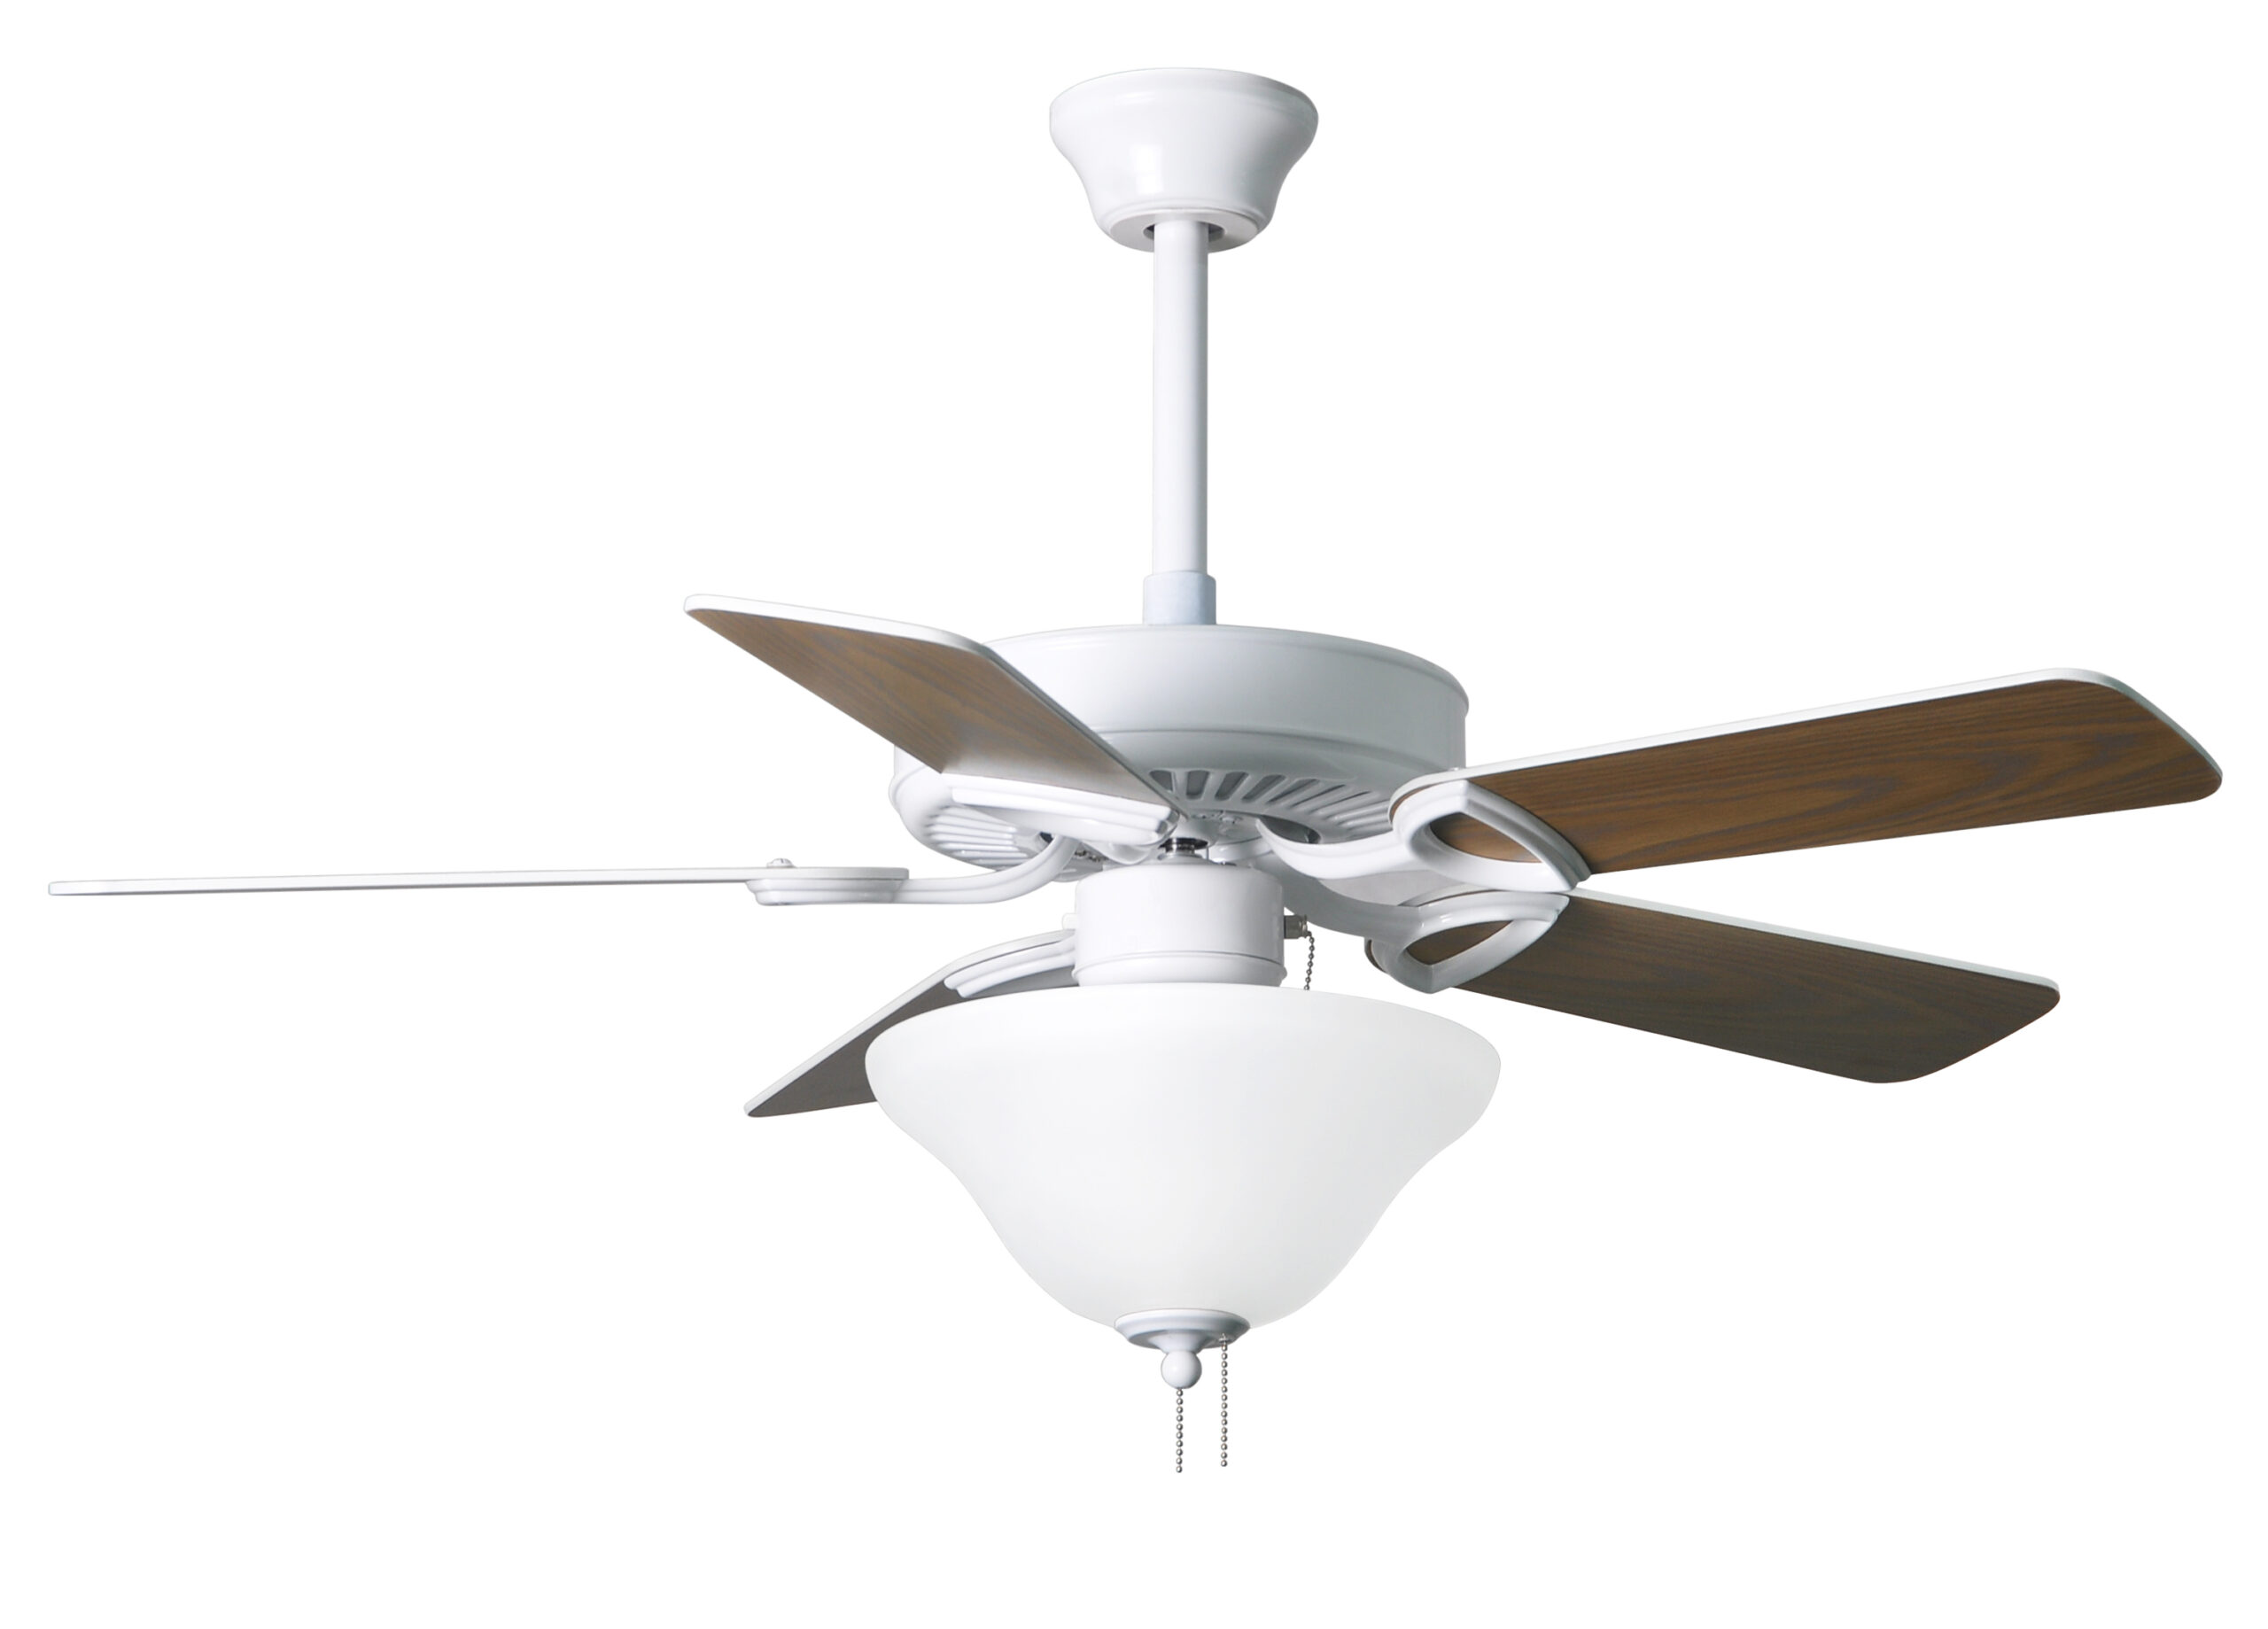 America 3-Speed Ceiling Fan with Light Kit in White Finish